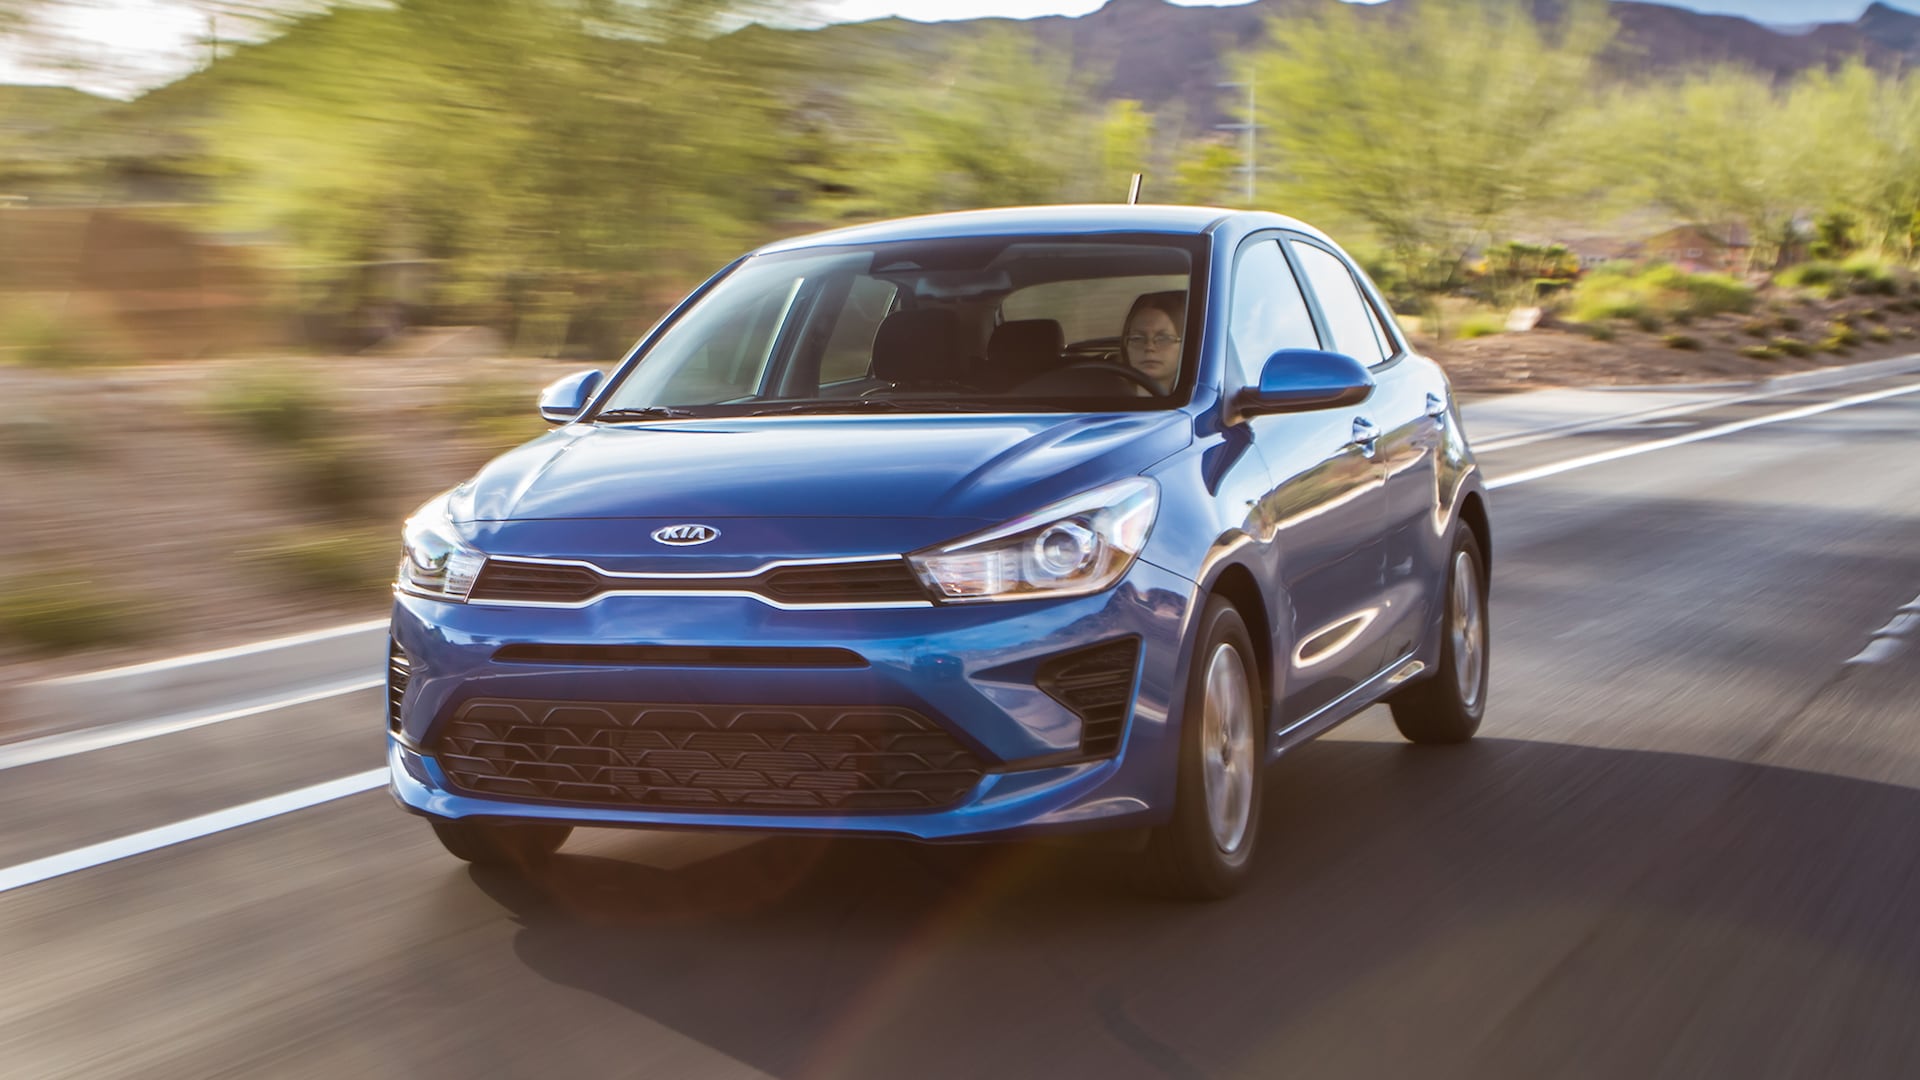 2021 Kia Rio Hatchback First Test: Scrappy and Sensible